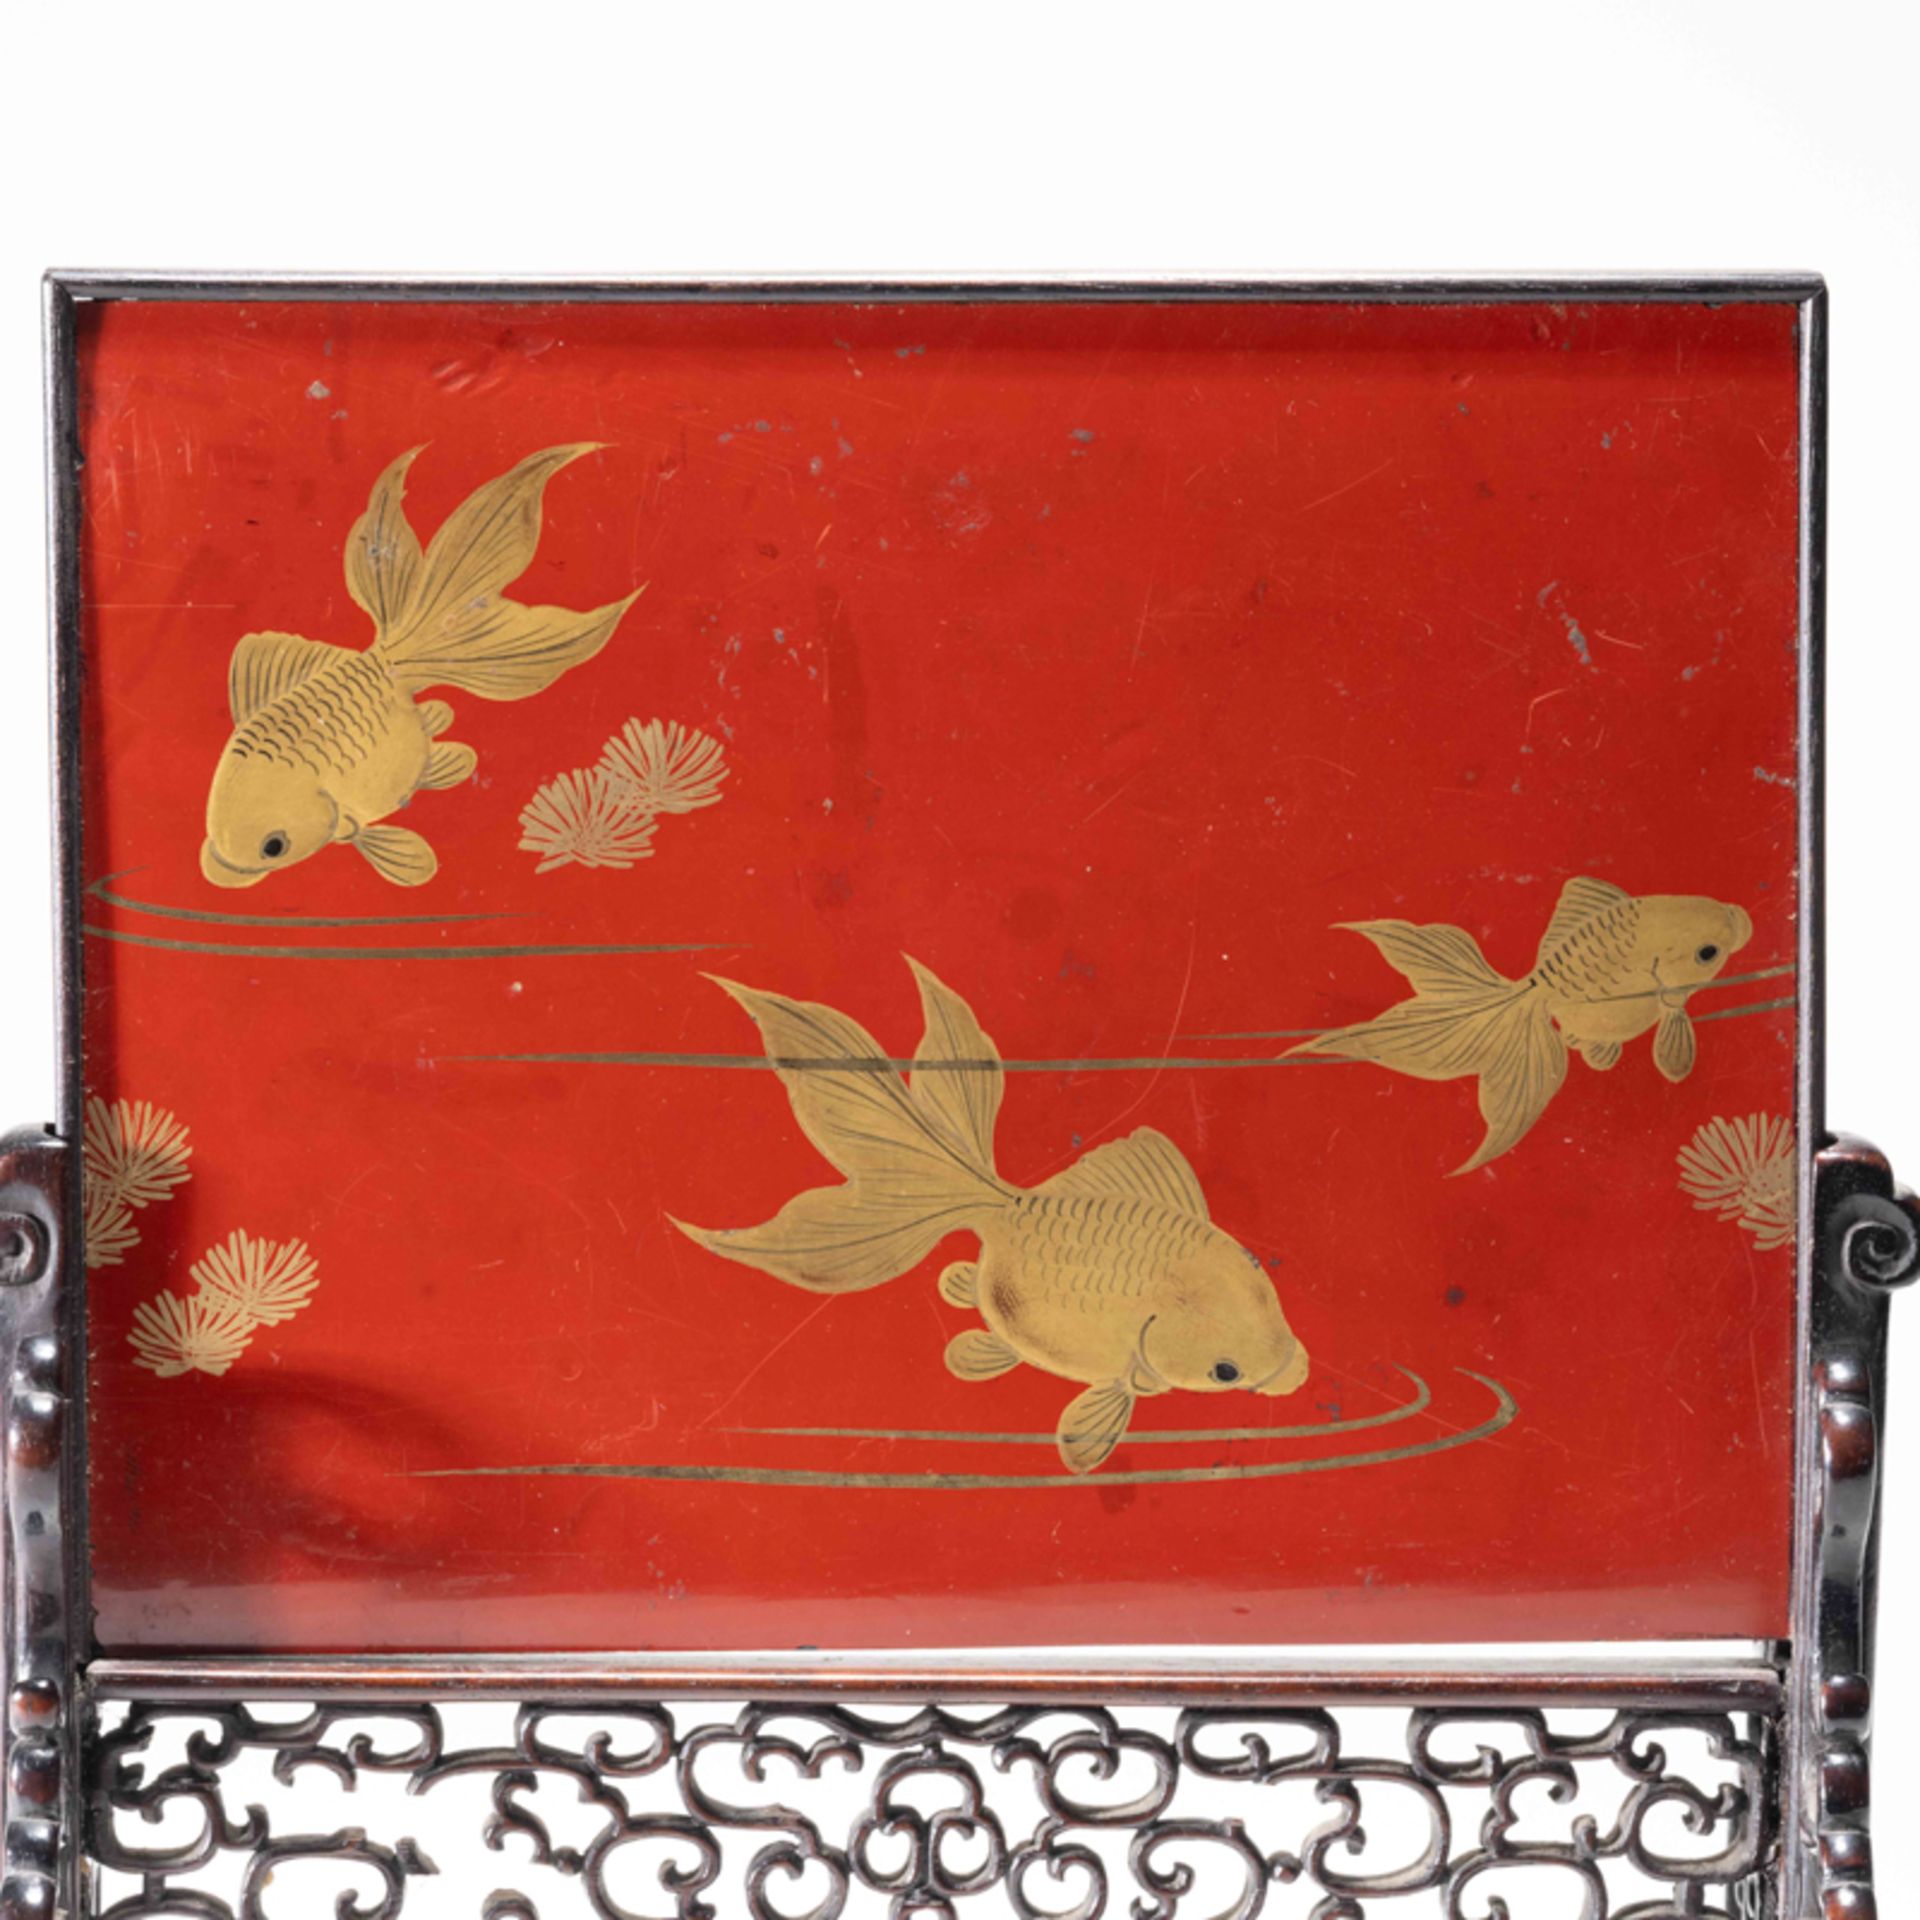 A LACQUER TABLE SCREEN WITH GOLD PAINTED GOLDFISH DESIGN  - Image 8 of 9